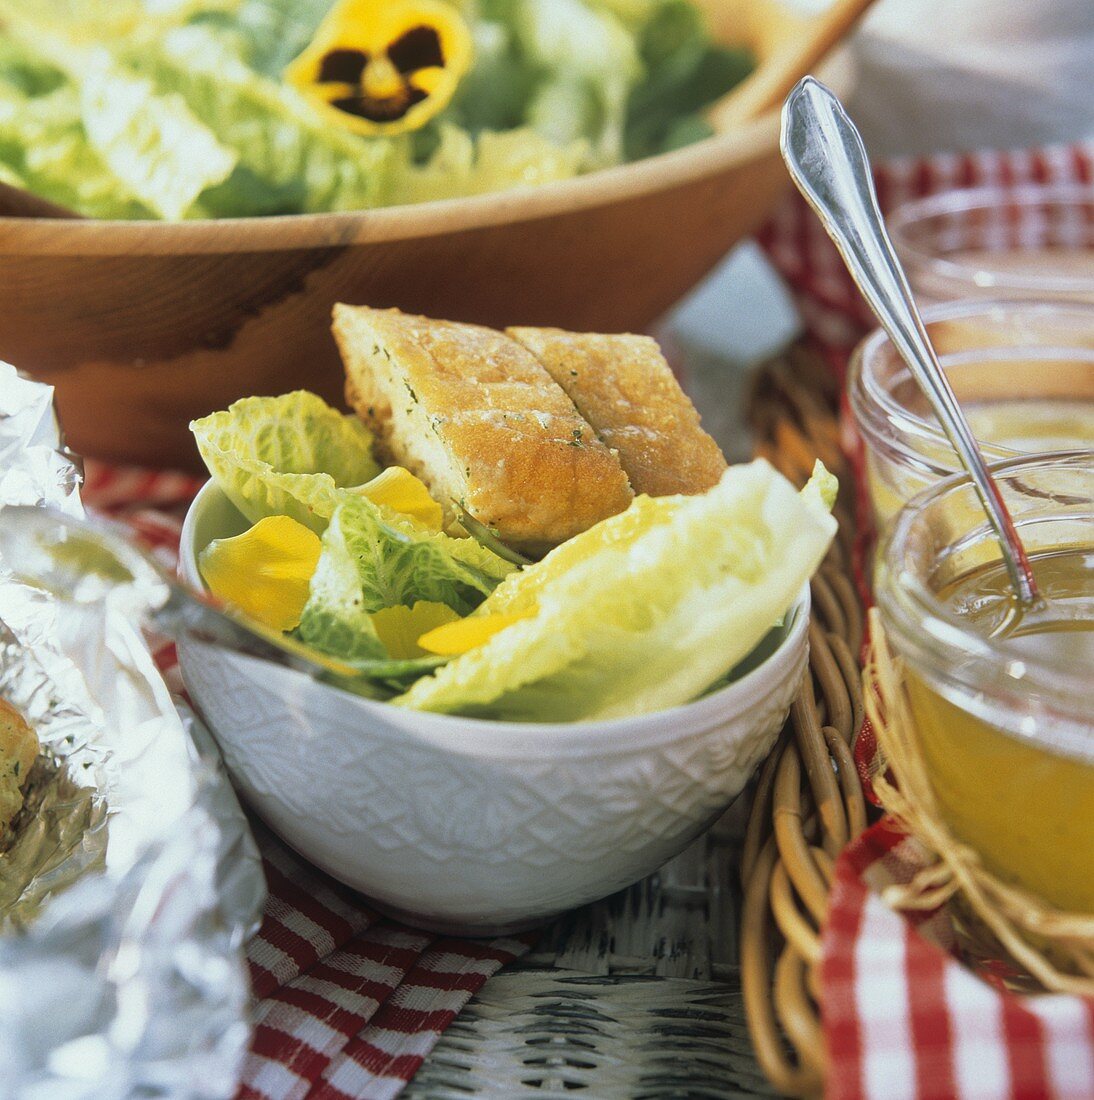 Romaine Lettuce Salad with Pansies and Garlic Bread